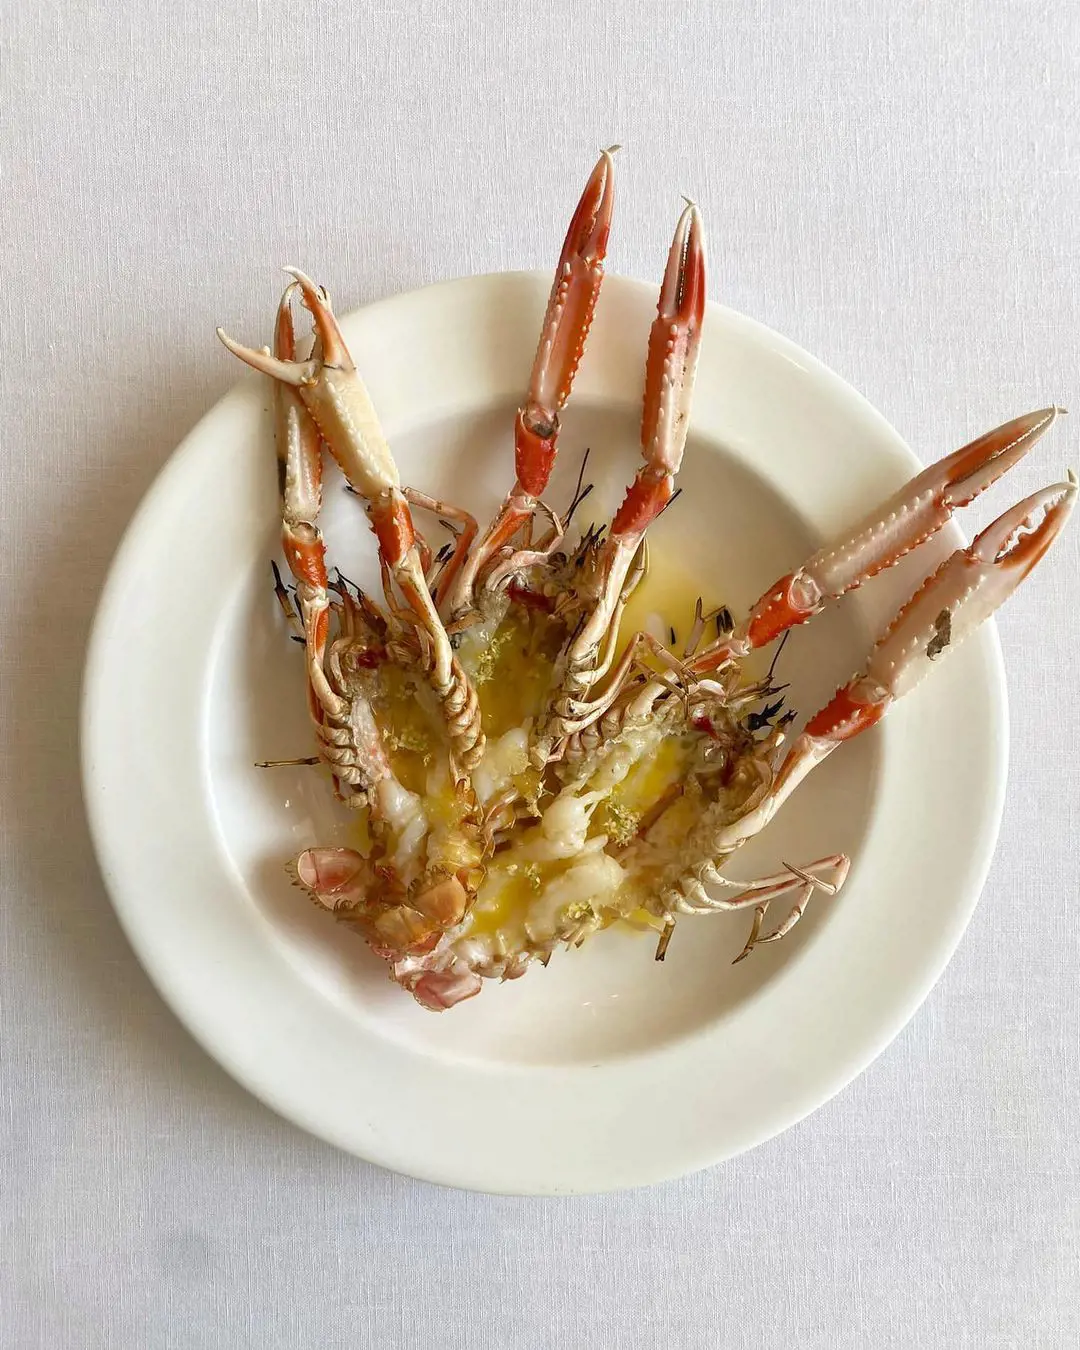 Grilled langoustines with elderflower butter and finger lime